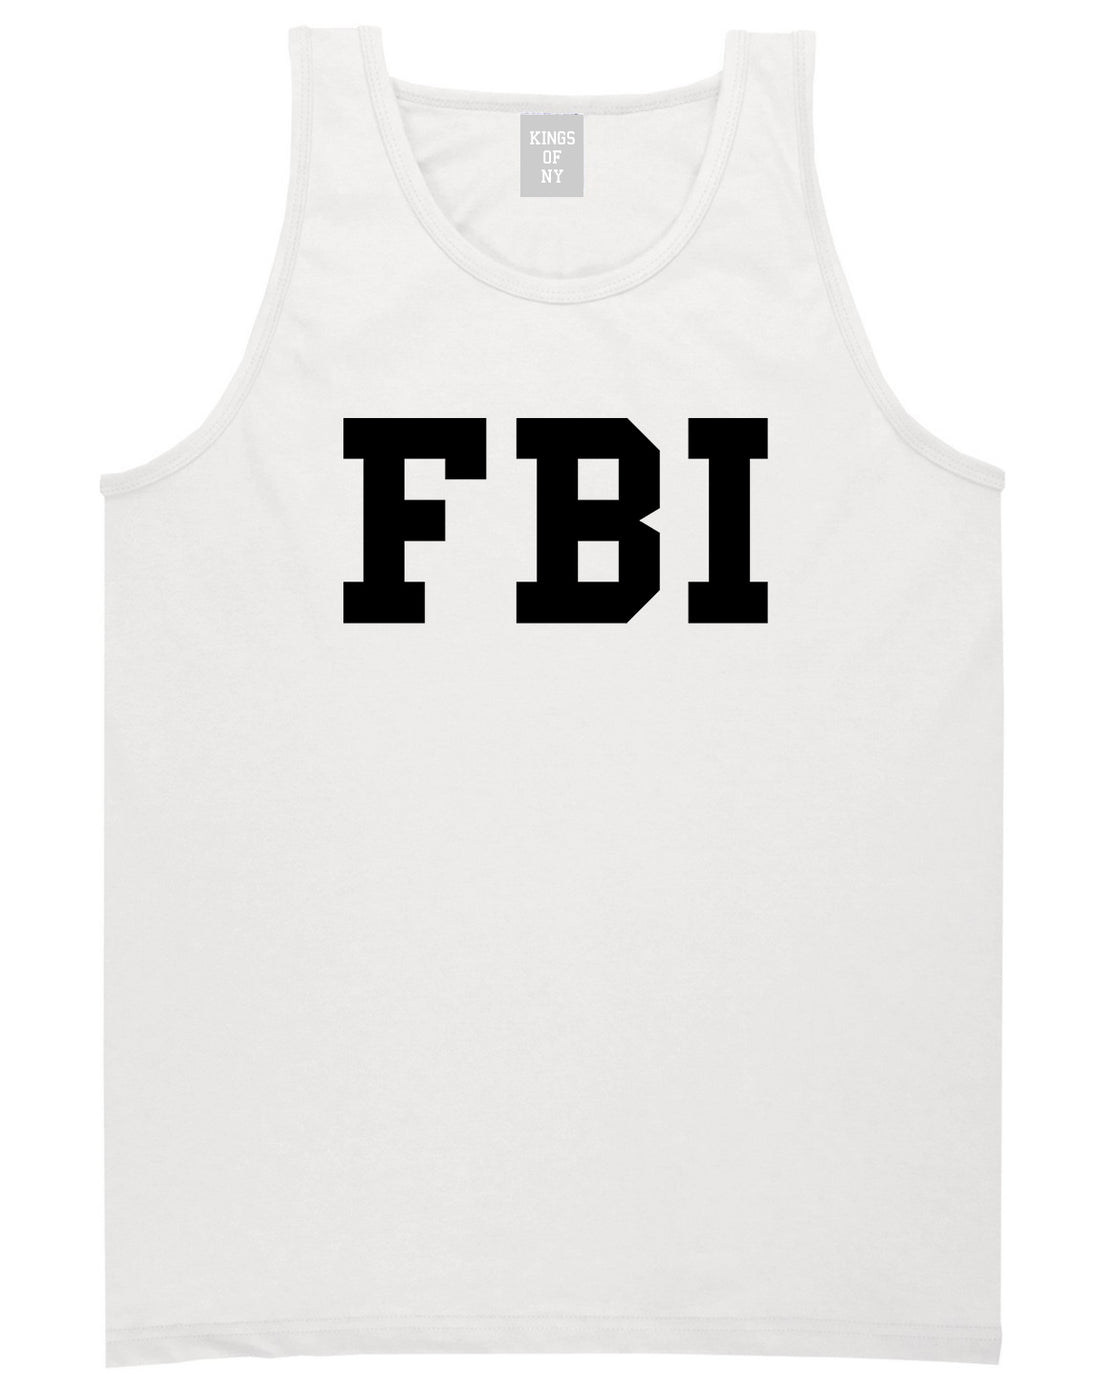 FBI Law Enforcement Mens White Tank Top Shirt by KINGS OF NY